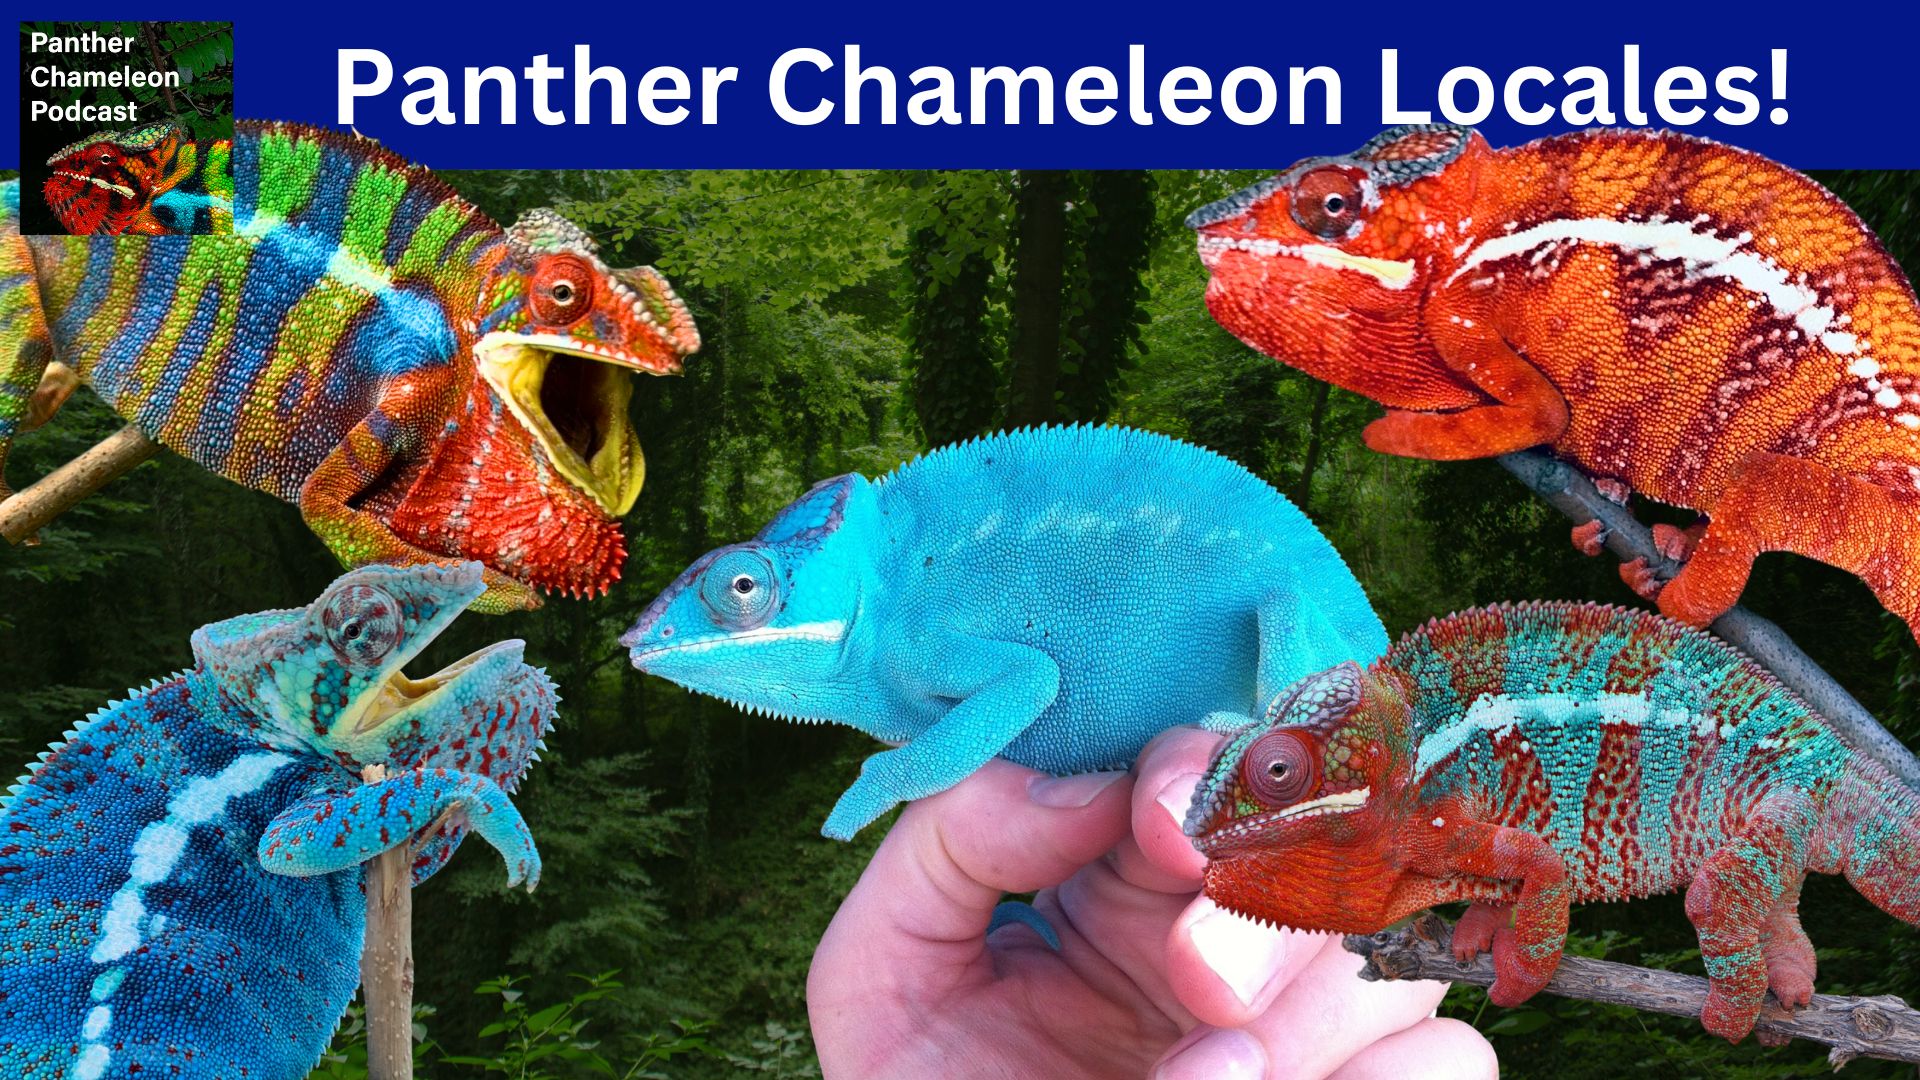 Panther Chameleon Locales – How to Choose - Chameleon Academy